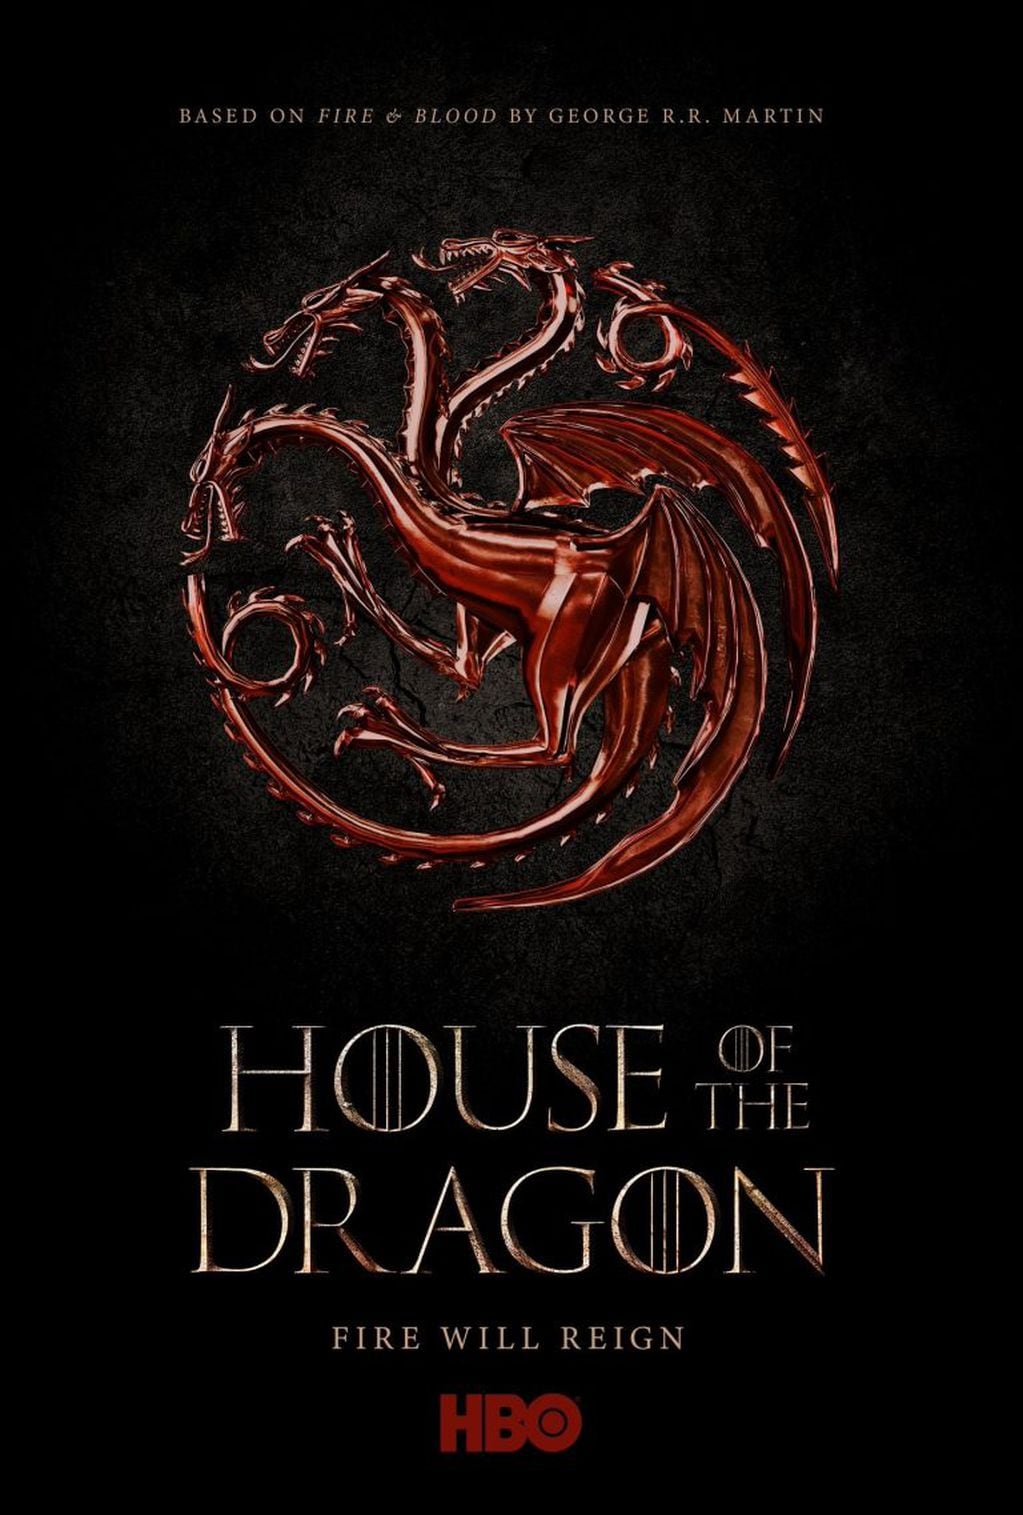 Afiche oficial House of The Dragon